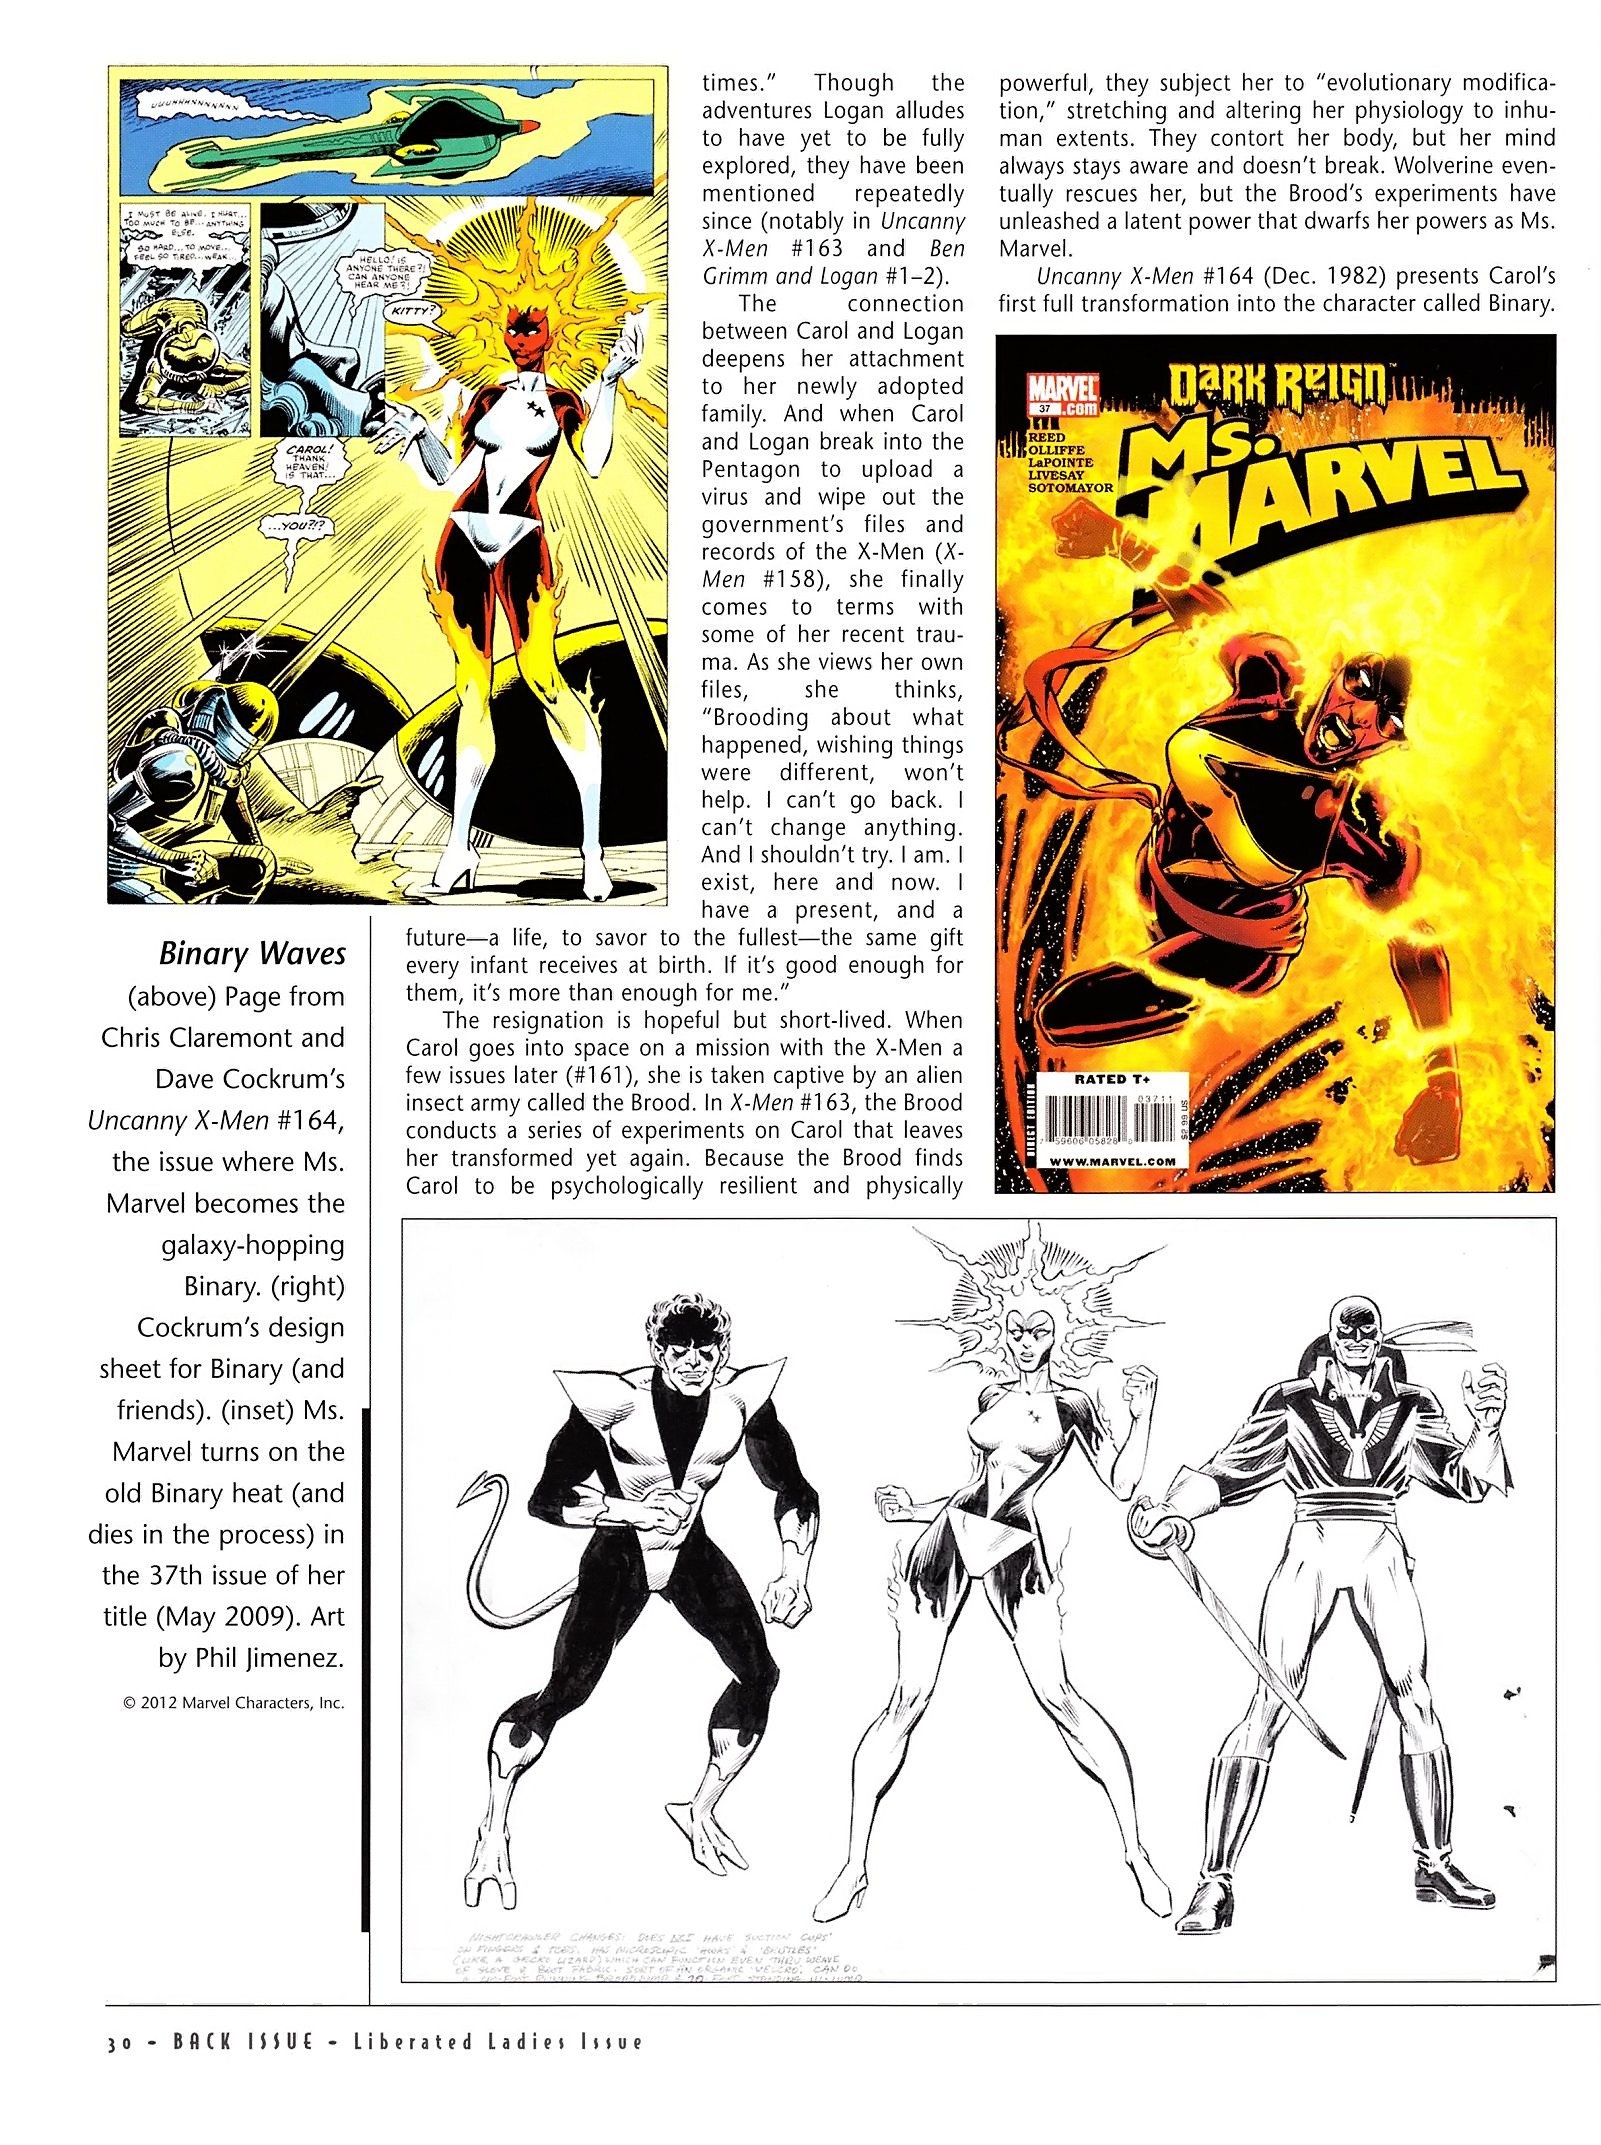 Read online Back Issue comic -  Issue #54 - 30